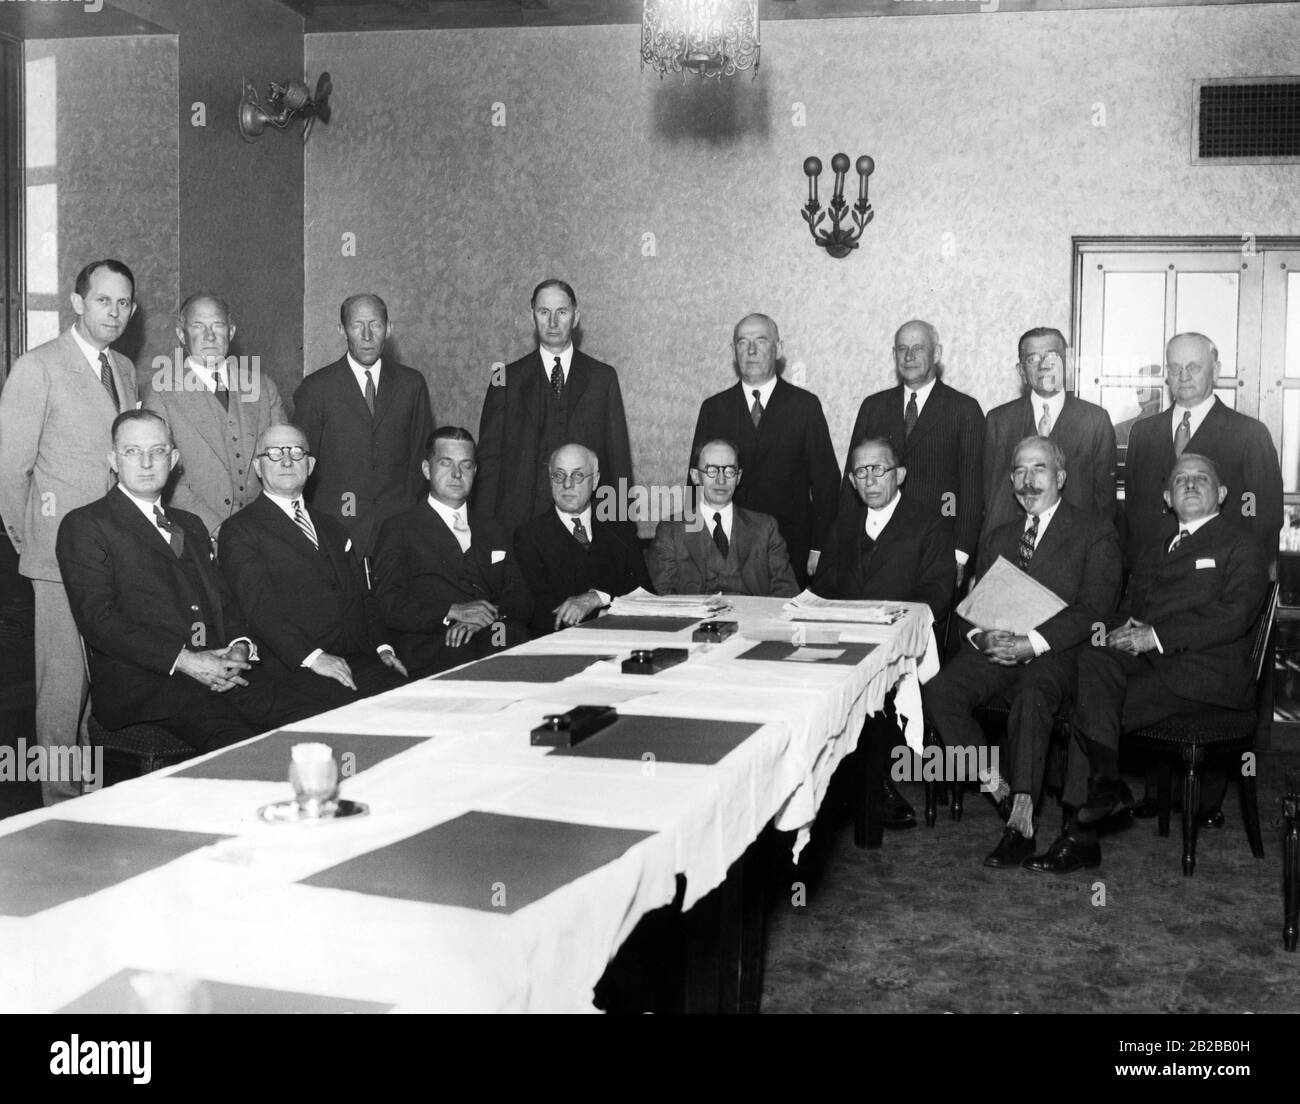 Prohibition: Conference of the Alcohol-Bureau in Washington D.C to discuss the poisoning of commercial and industrial alcohol (from left to right): Frank M. Nonan, Fred S. Rogers, Russel R. Brown, Seymour Lowman, J.M. Doran, Henry Chatfield and Dr. Harris E. Howe and standing Dr. Ralph Merritt, Willoughby Mc Cormick, Everett Hurlburt, C. Mahlon Kline, Dr. Martin Ittner, A. Homer Smith, Frank A. Blair, Dr. S.L. Hilton and S.C. Henry. Stock Photo